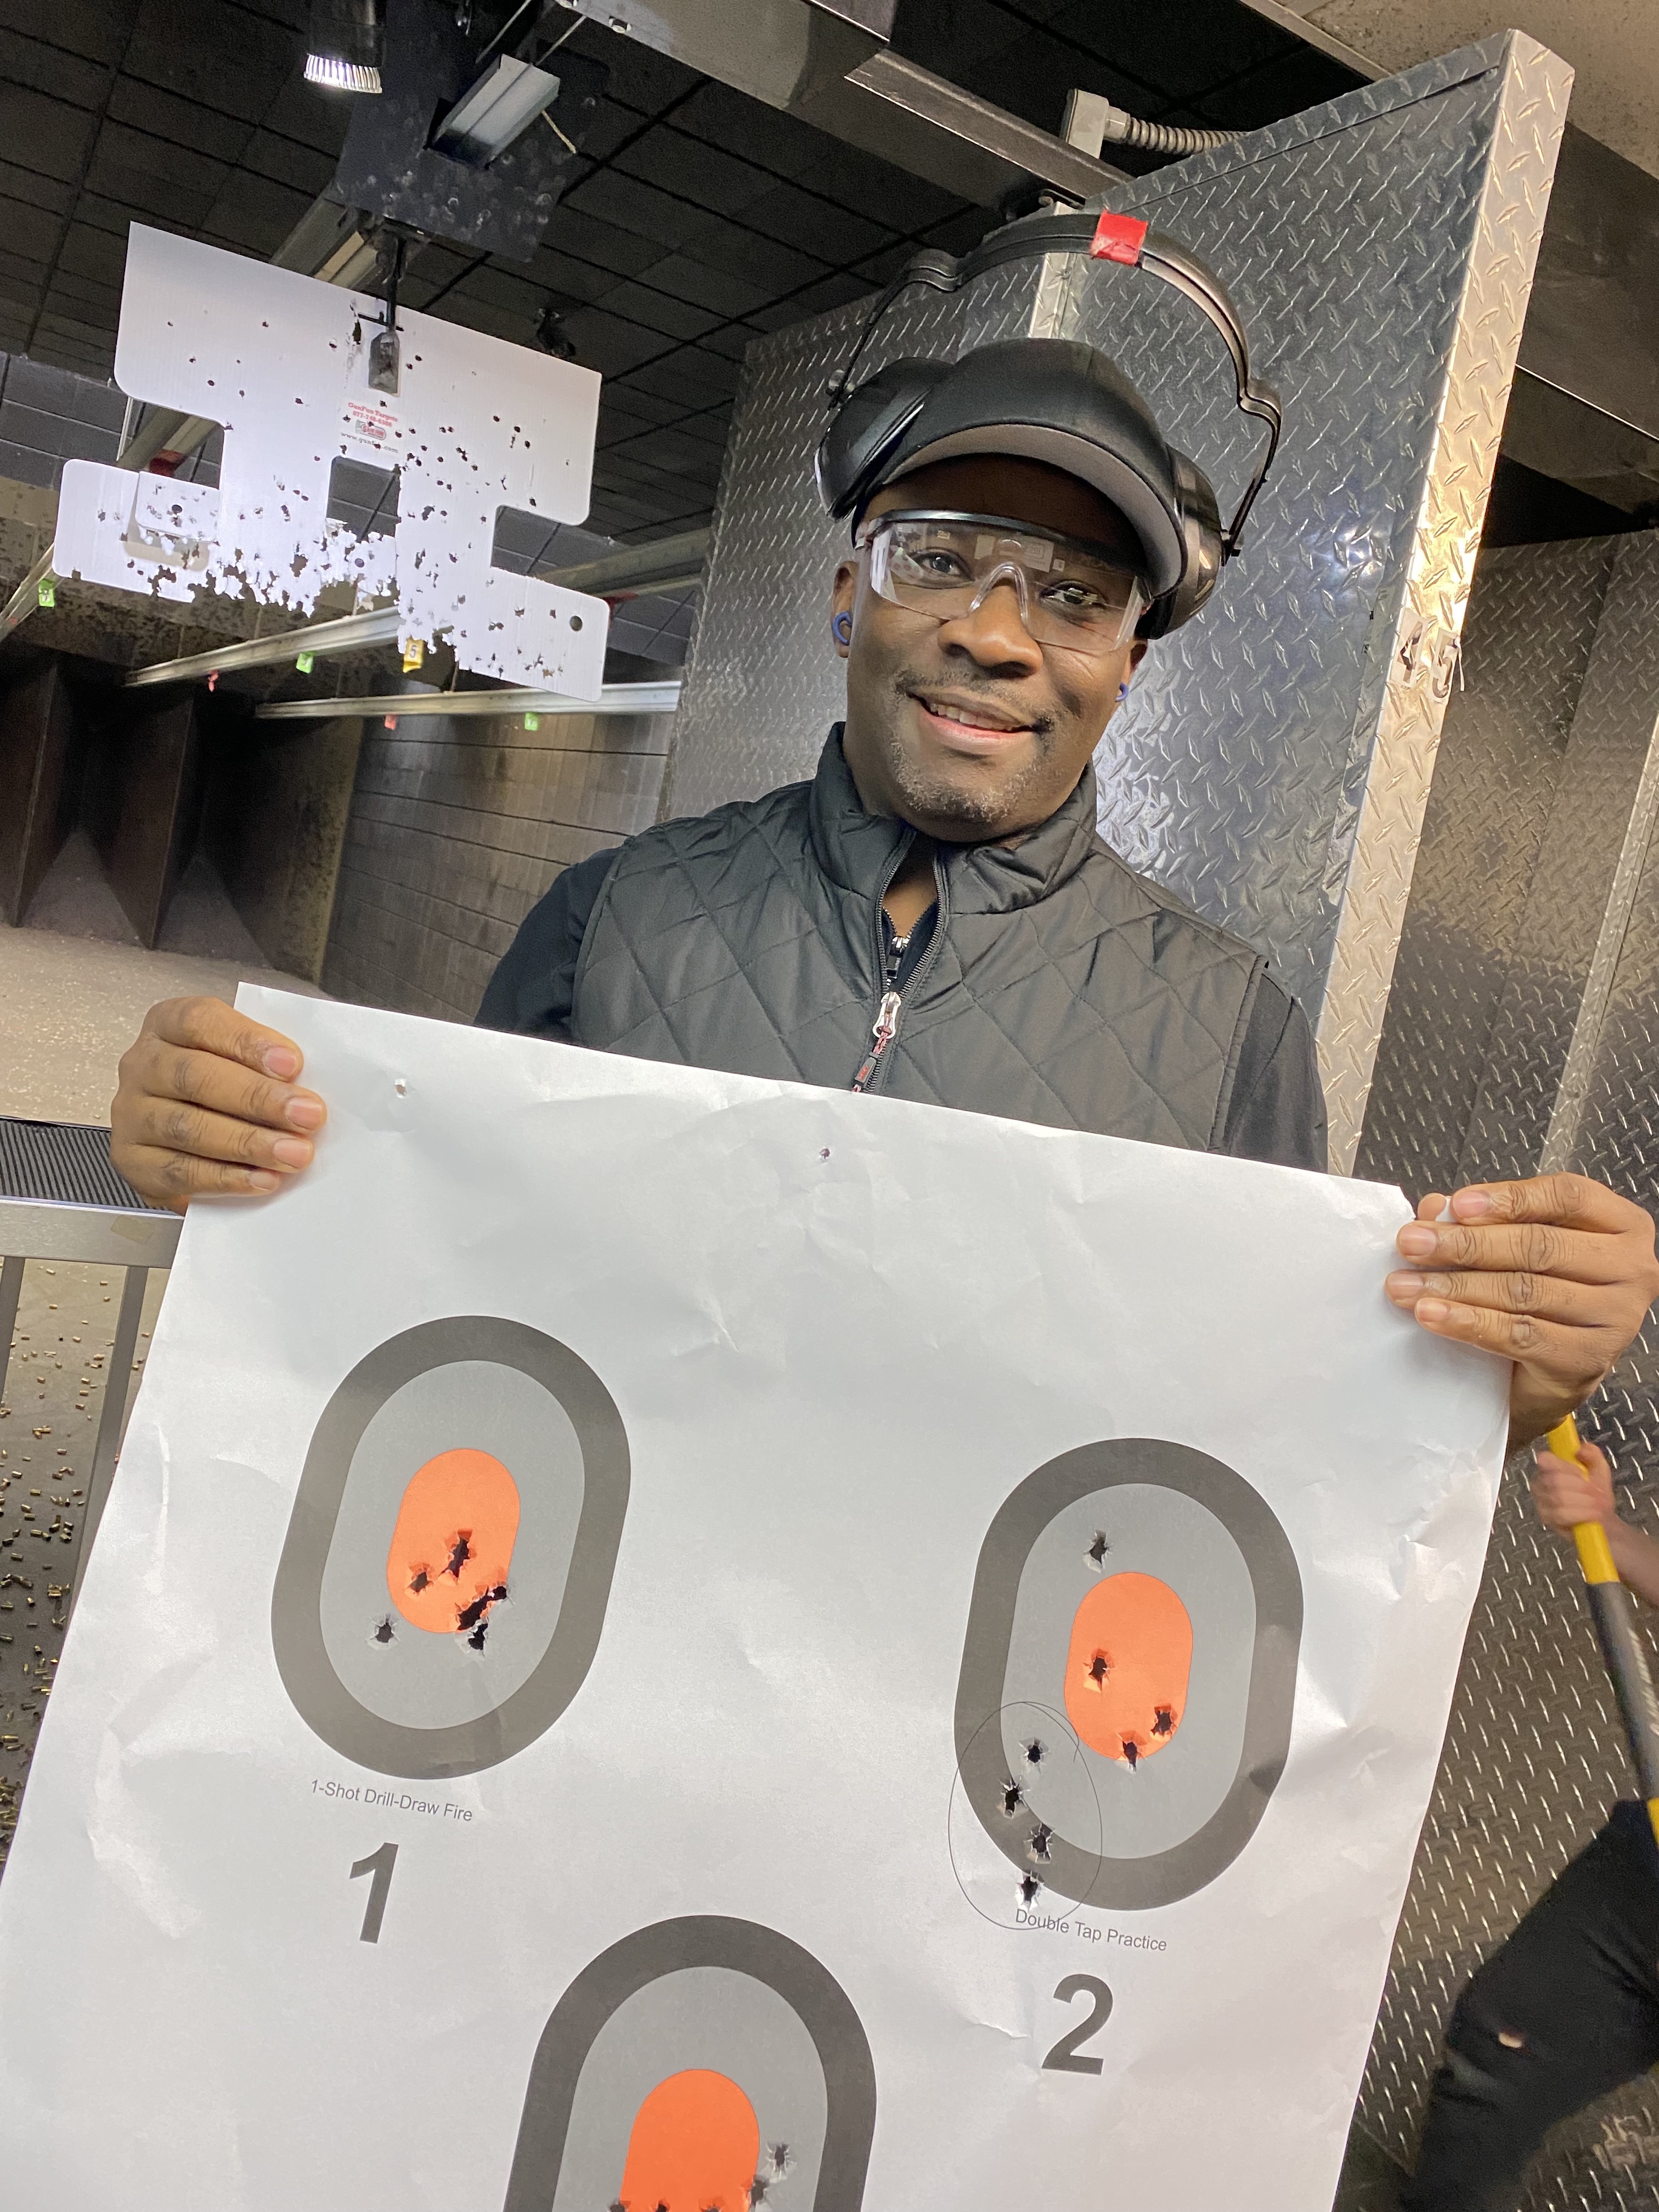 proud firearms student with target